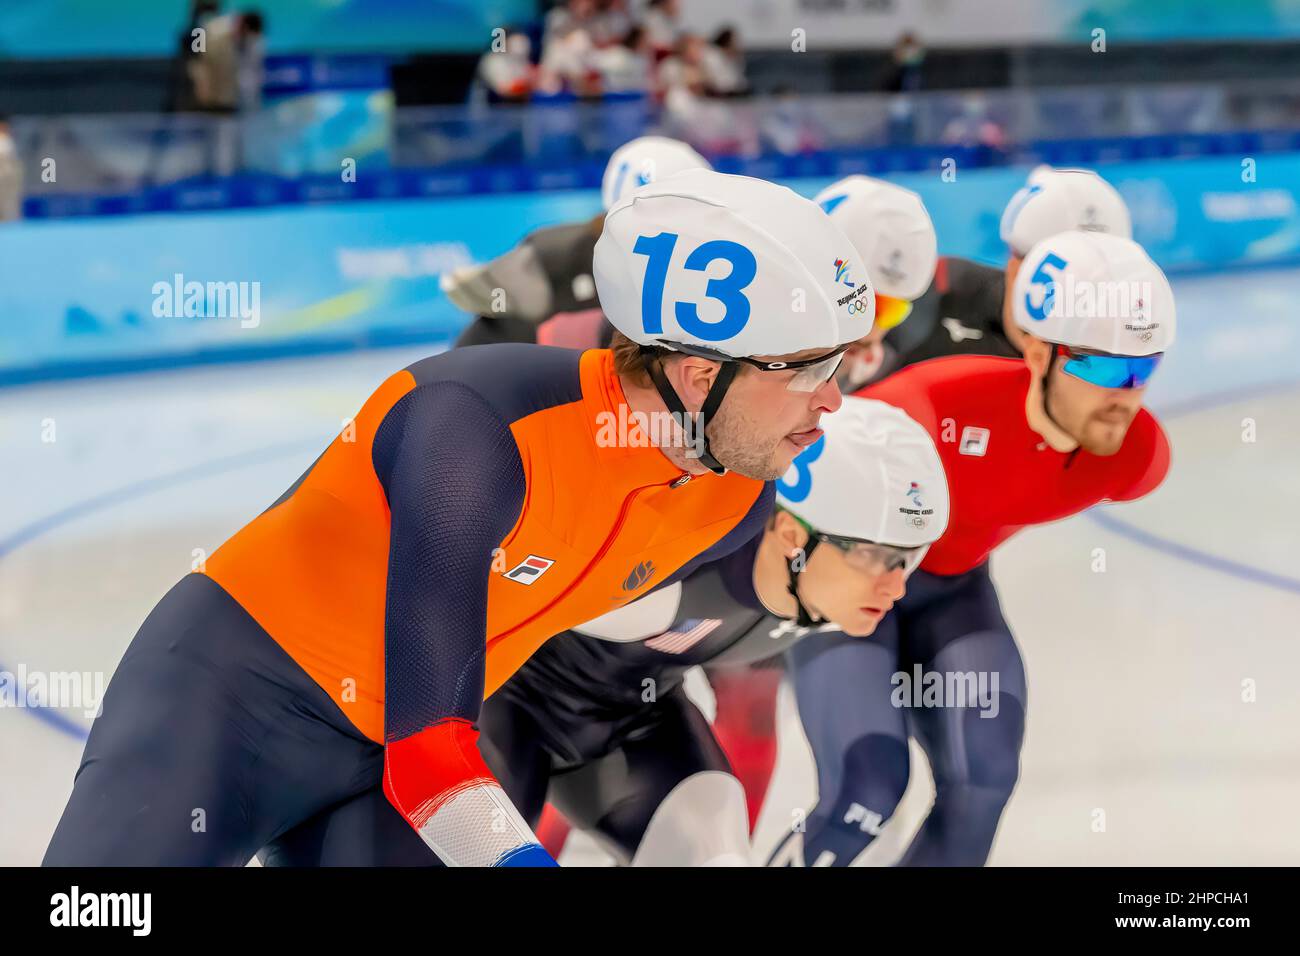 Beijing, Hebei, China. 19th Feb, 2022. Sven KRAMER (NED) races through the turns during the Mens Speed Skating Mass Start at the National Speed Skating Oval in Beijing, Hebei, China. (Credit Image: © Walter G. Arce Sr./ZUMA Press Wire) Stock Photo